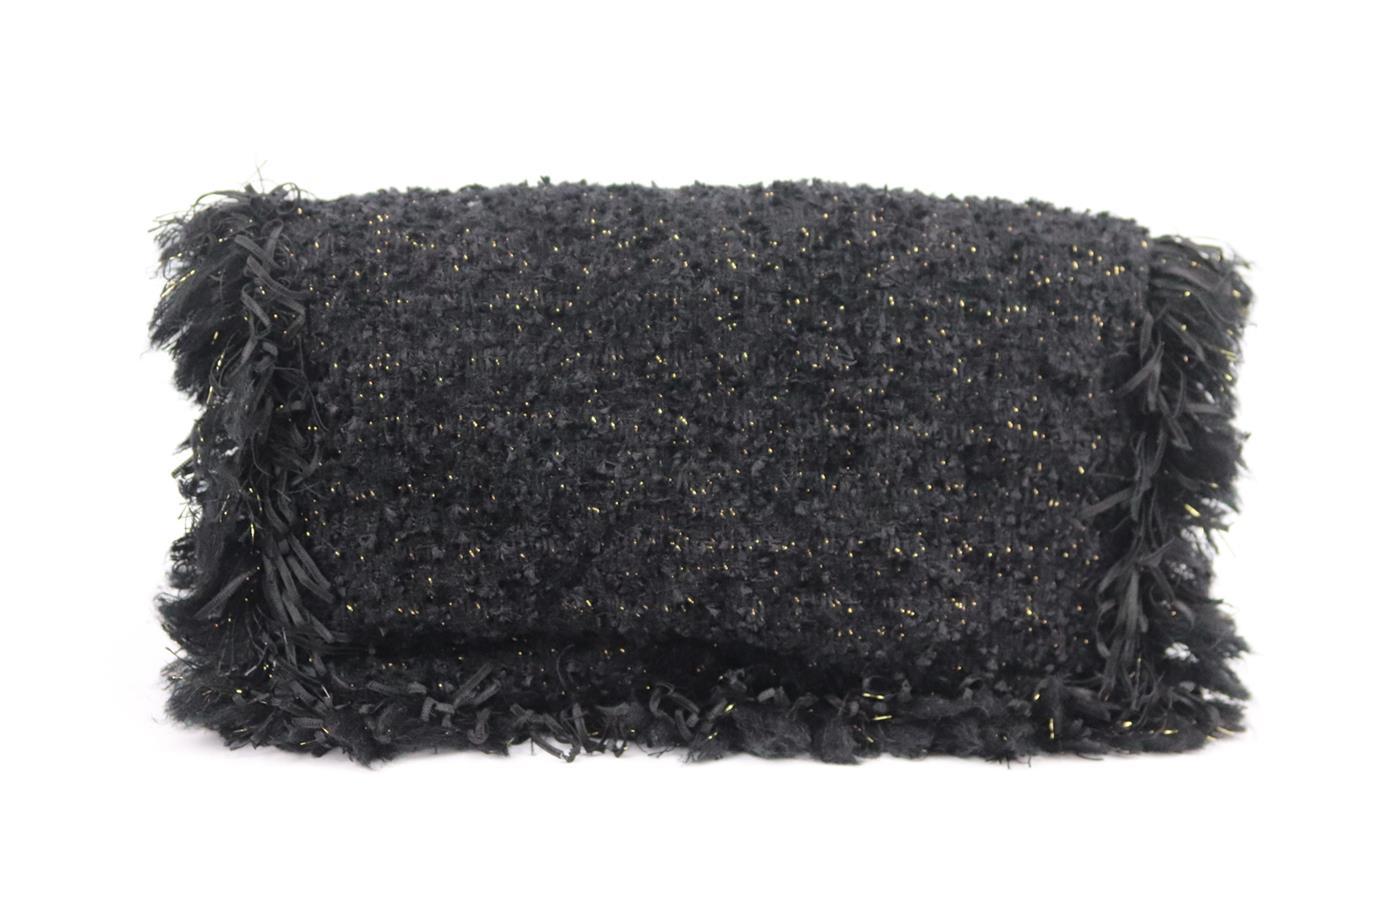 Chanel 2017 cc detailed fringed tweed clutch. Made from black tweed with CC gold-tone hardware on the front with fringed edge, it has a large internal compartment with zipped pocket. Black. Magnetic fastening at front. Comes with authenticity card.